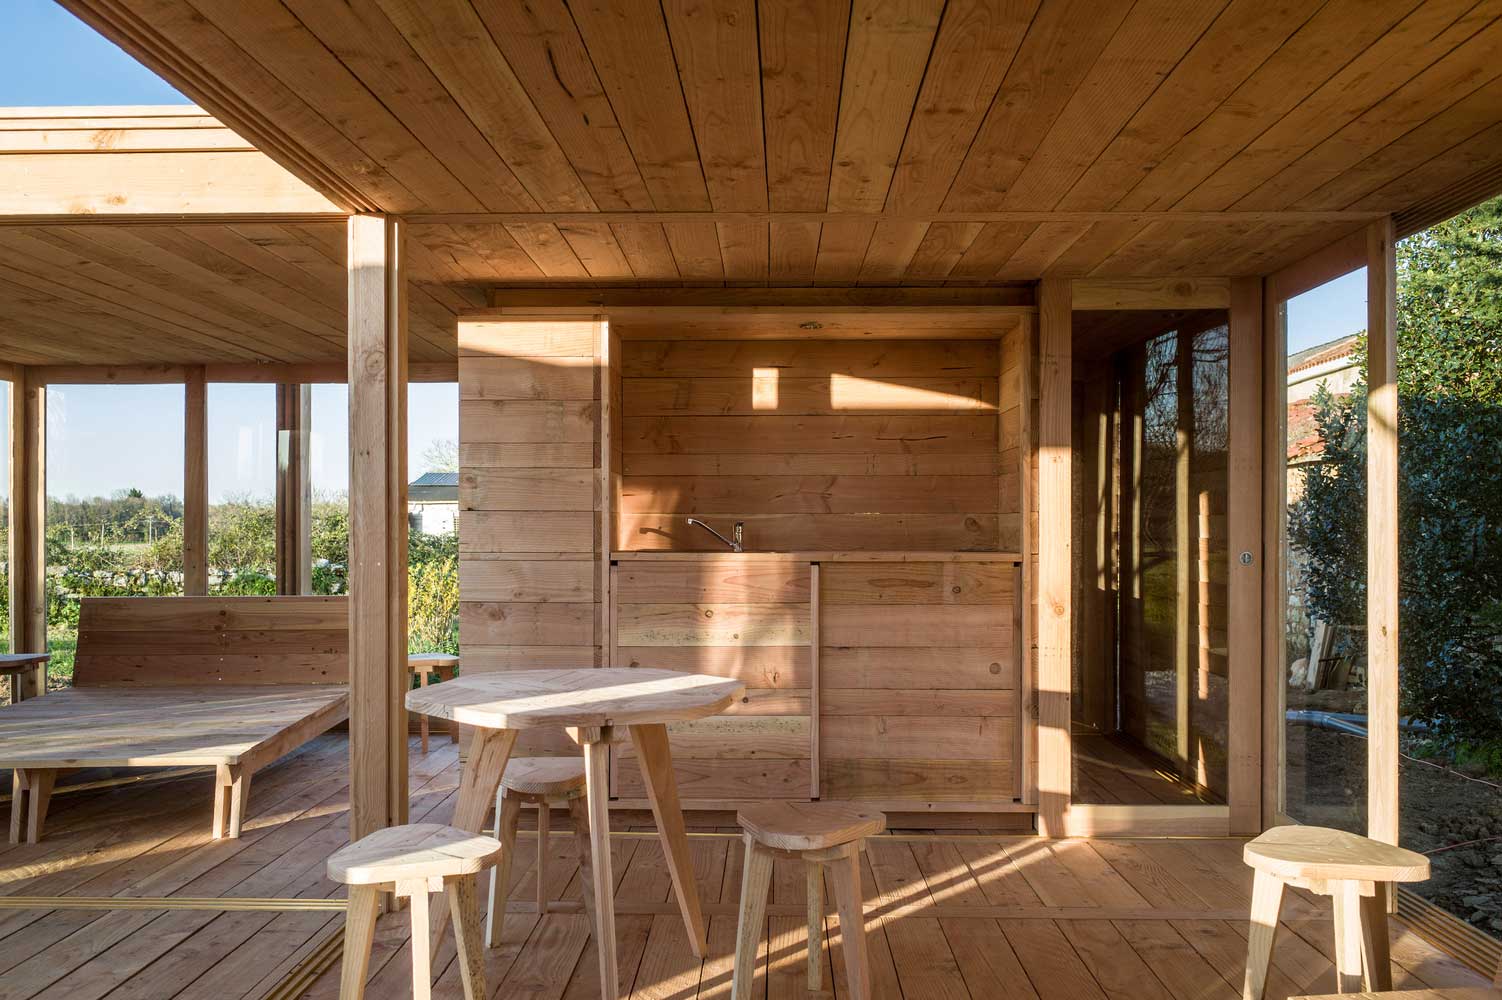 SIMPLE SMALL WOODEN HOUSE DESIGN FROM FRANCE / AN ISLAND OF COMFORT, WARMTH AND COZINESS